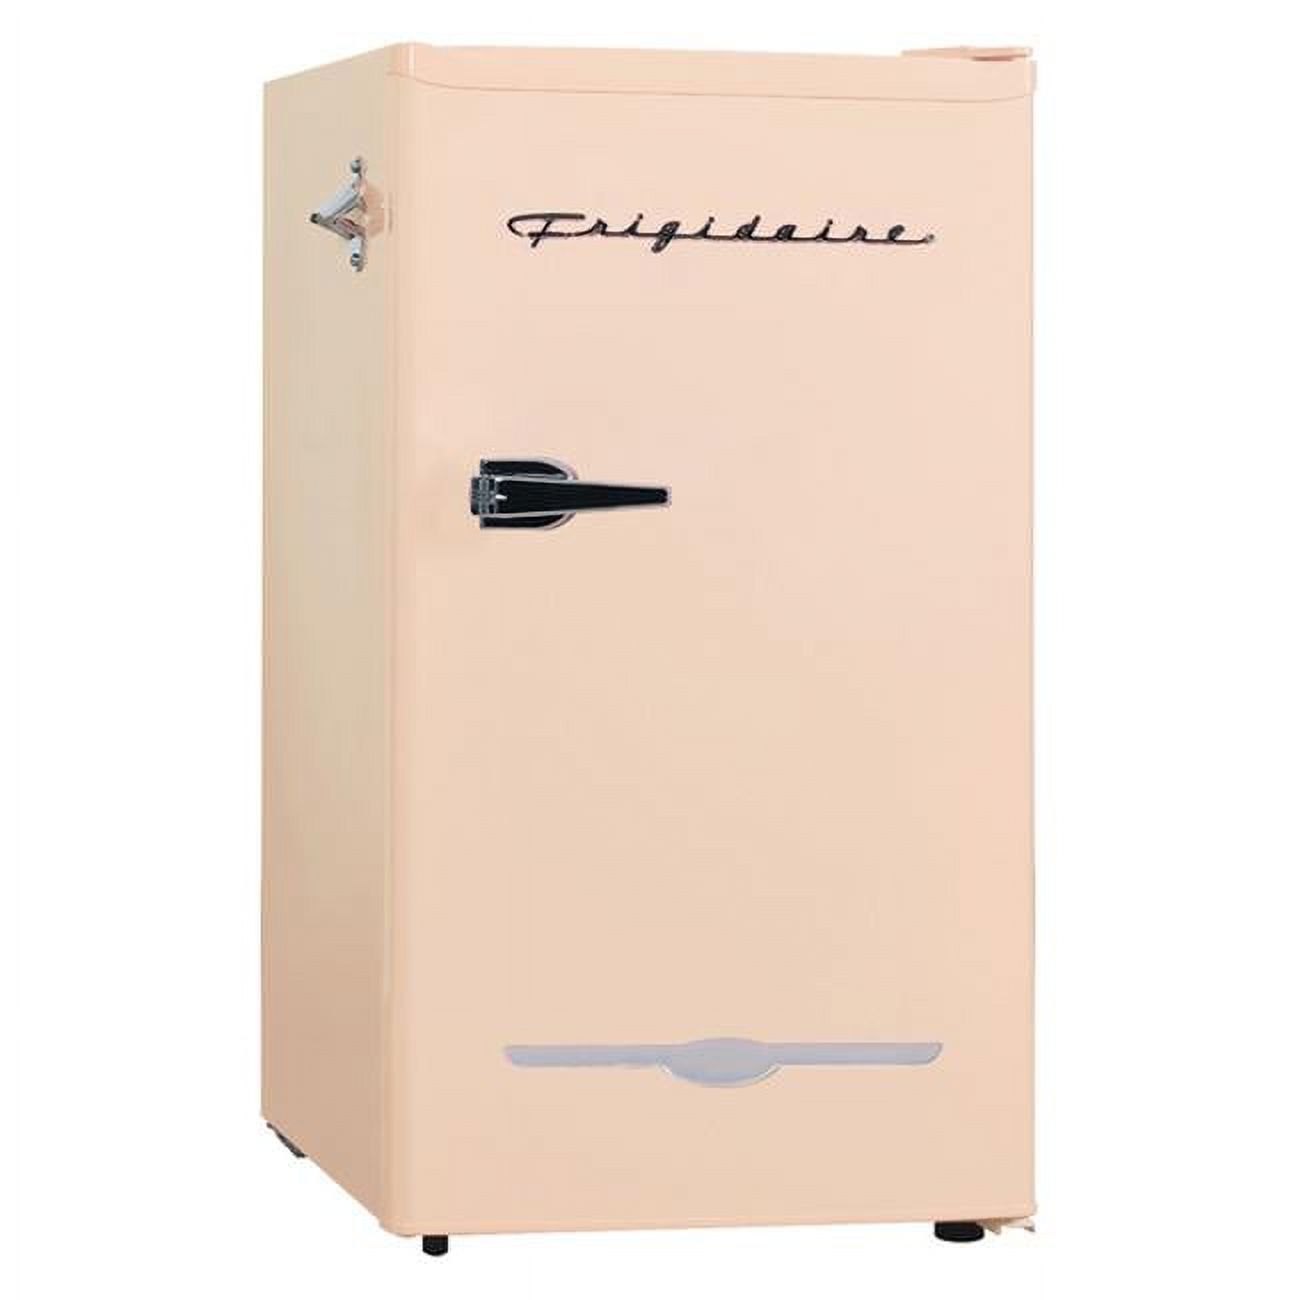 Frigidaire 3.2 Cu ft Retro Compact Refrigerator With Side Bottle Opener EFR376, Coral - image 1 of 11